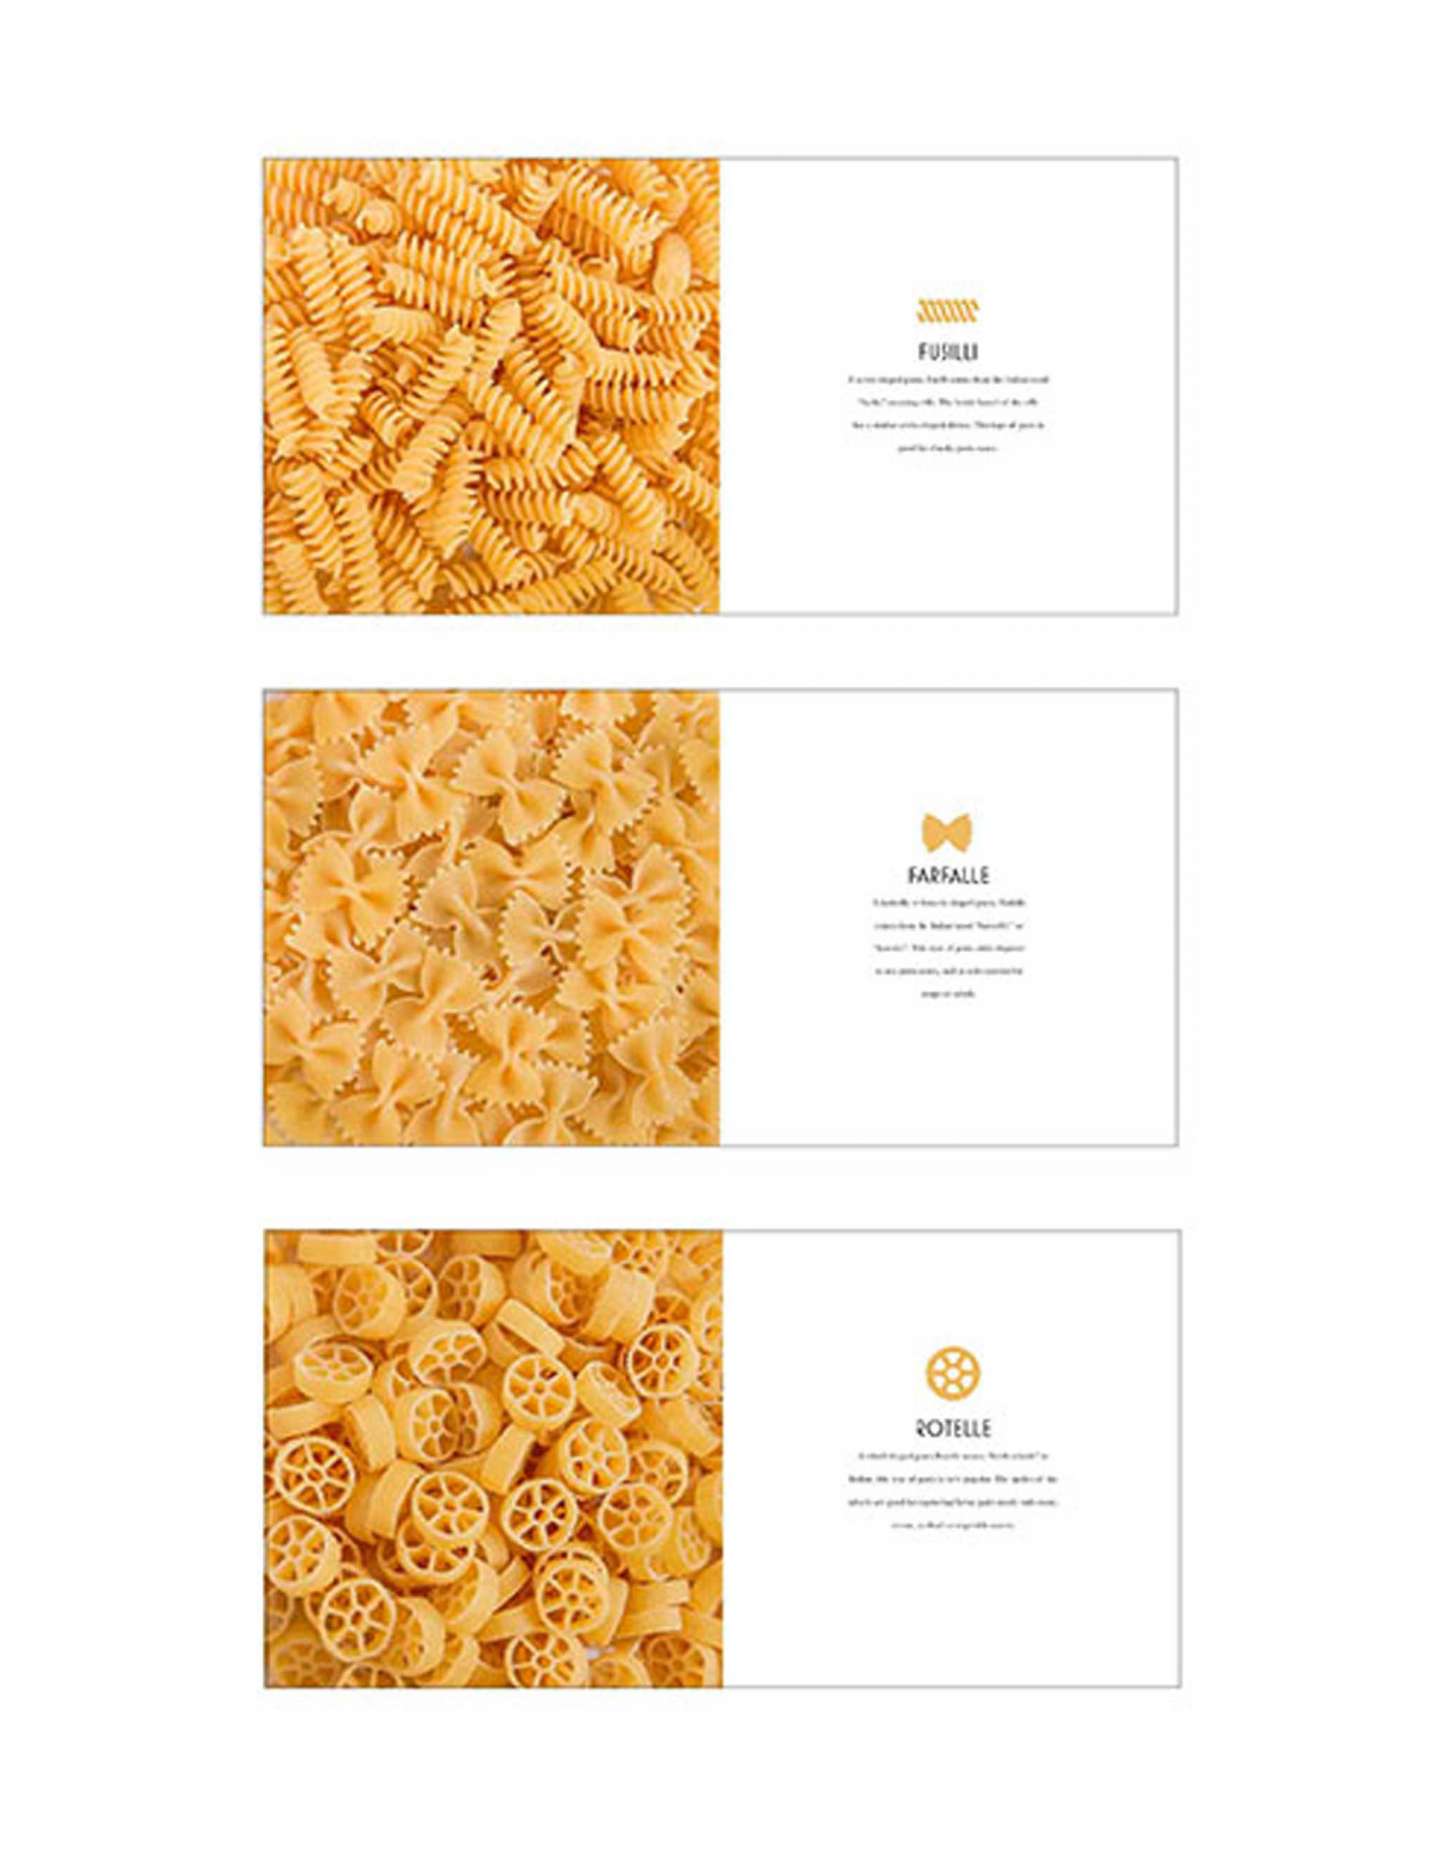 50 Shapes of Pasta